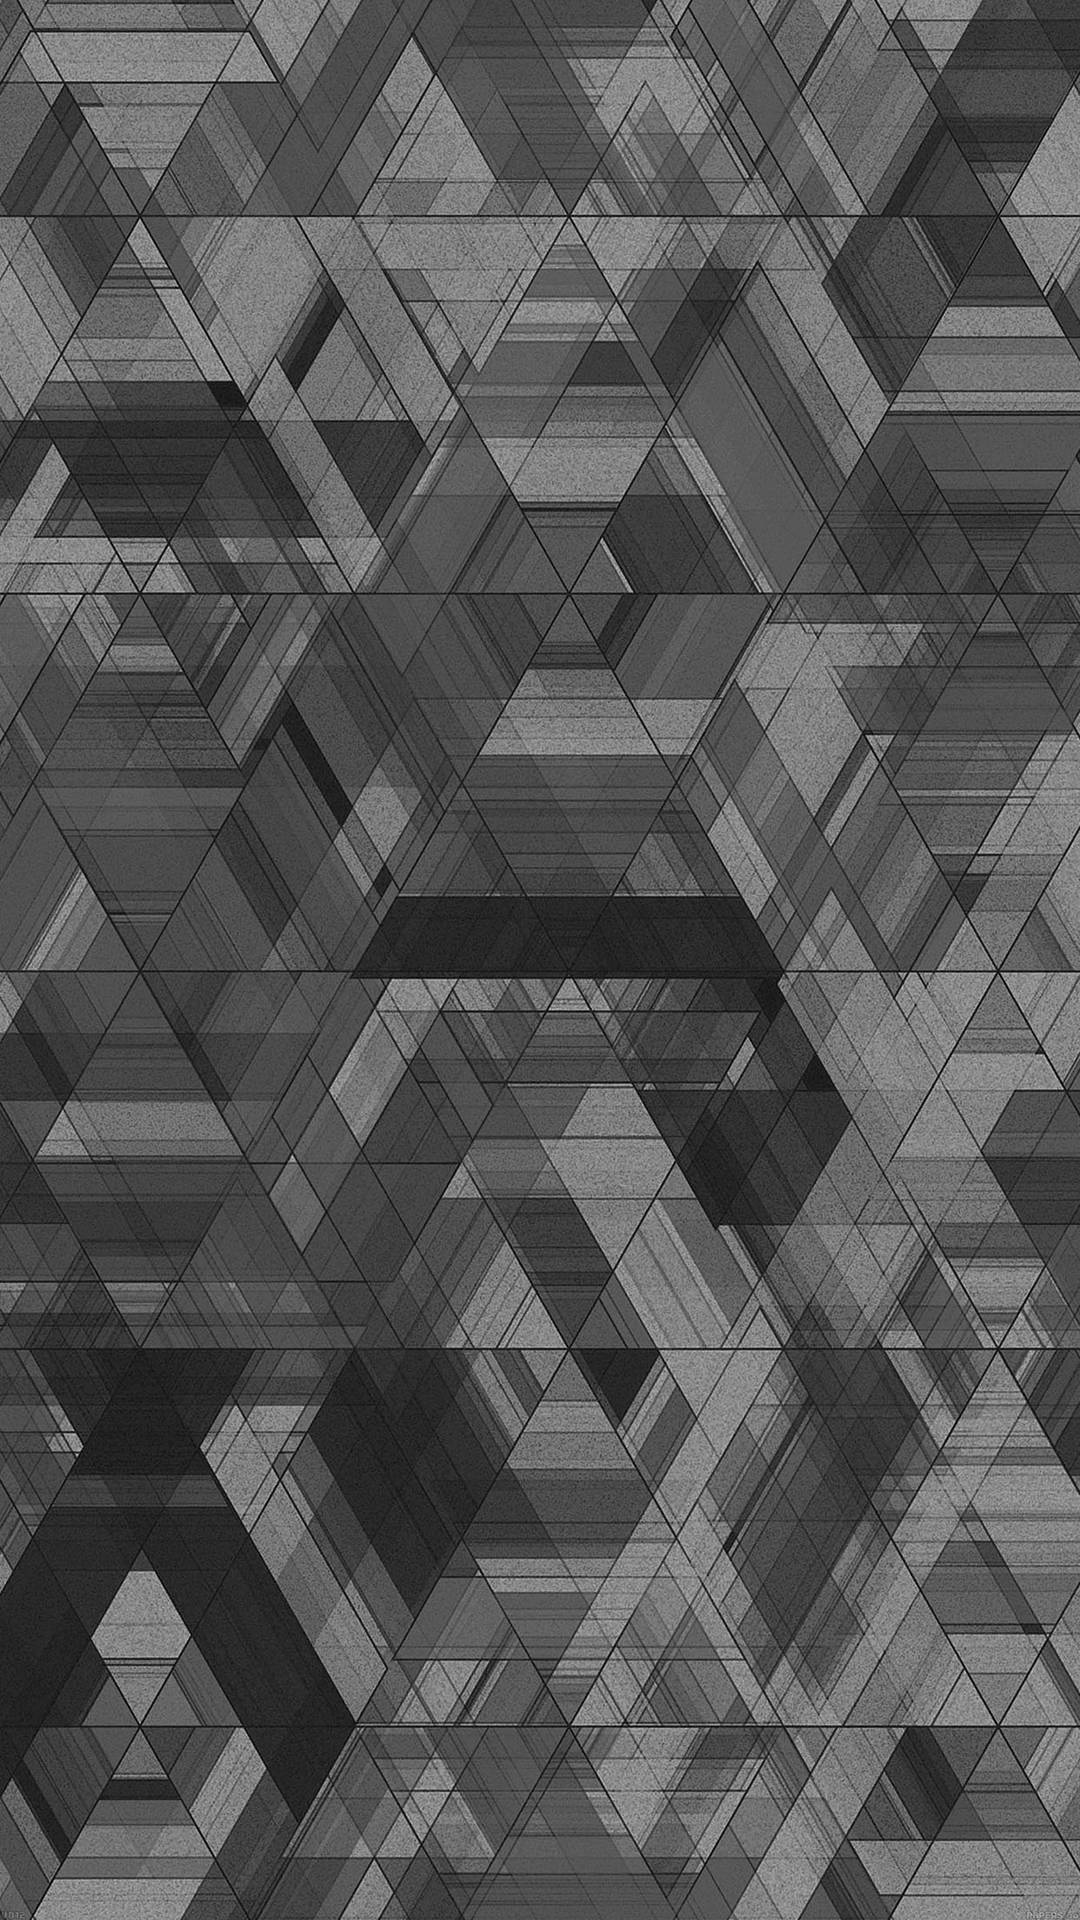 Sketch Triangles Black And Grey Iphone Background